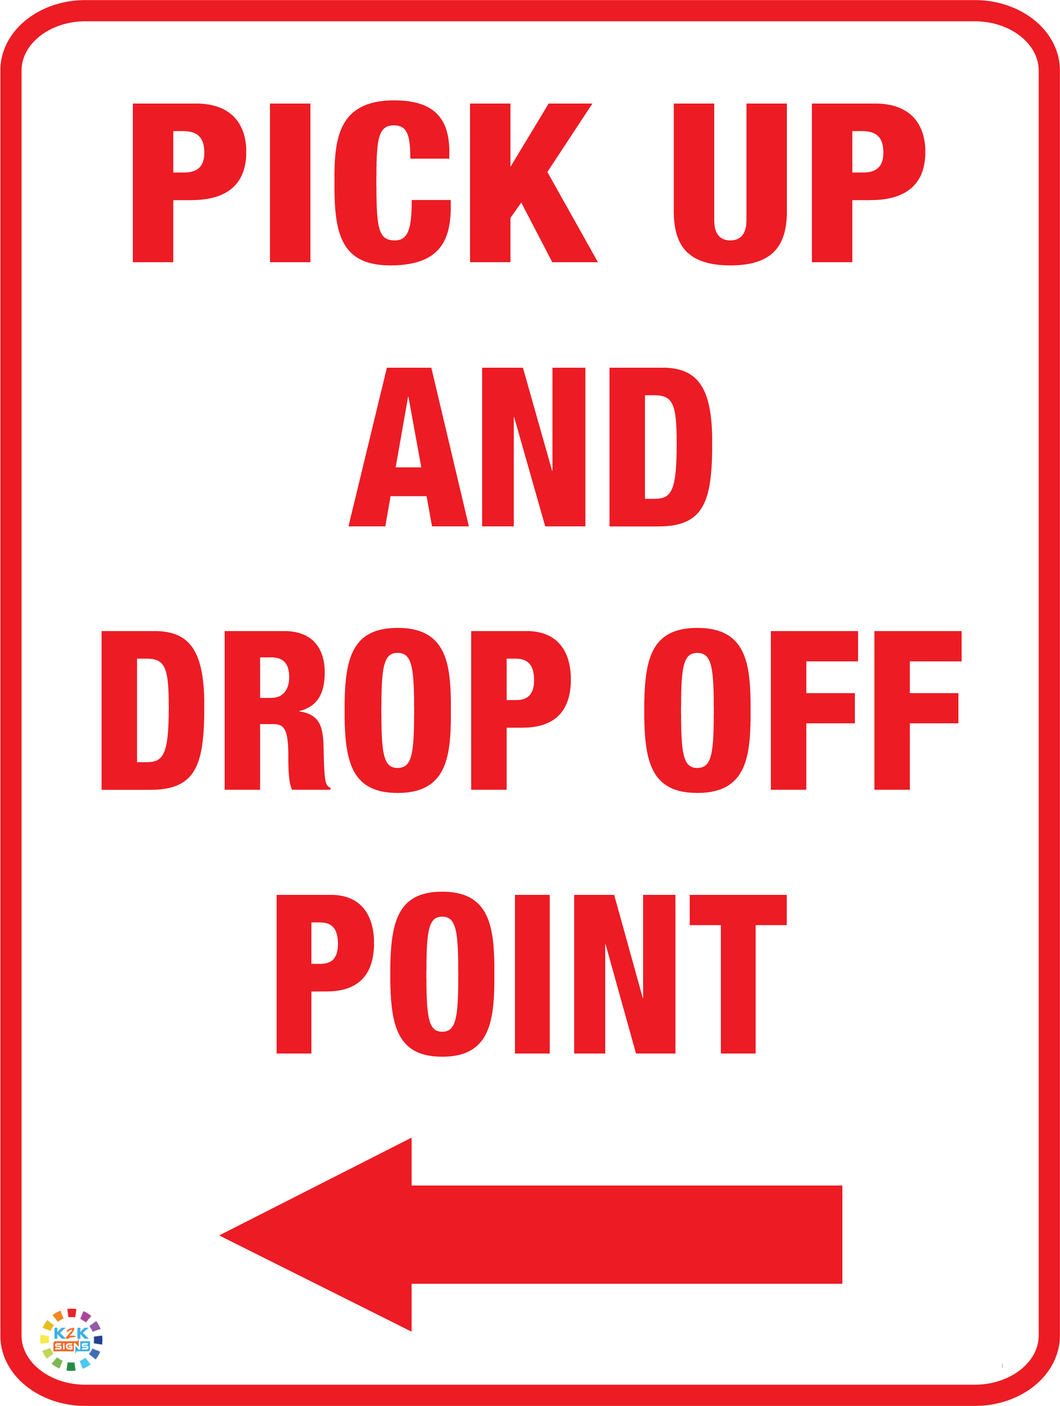 Pick Up And Drop Off Point (Left Arrow) Sign